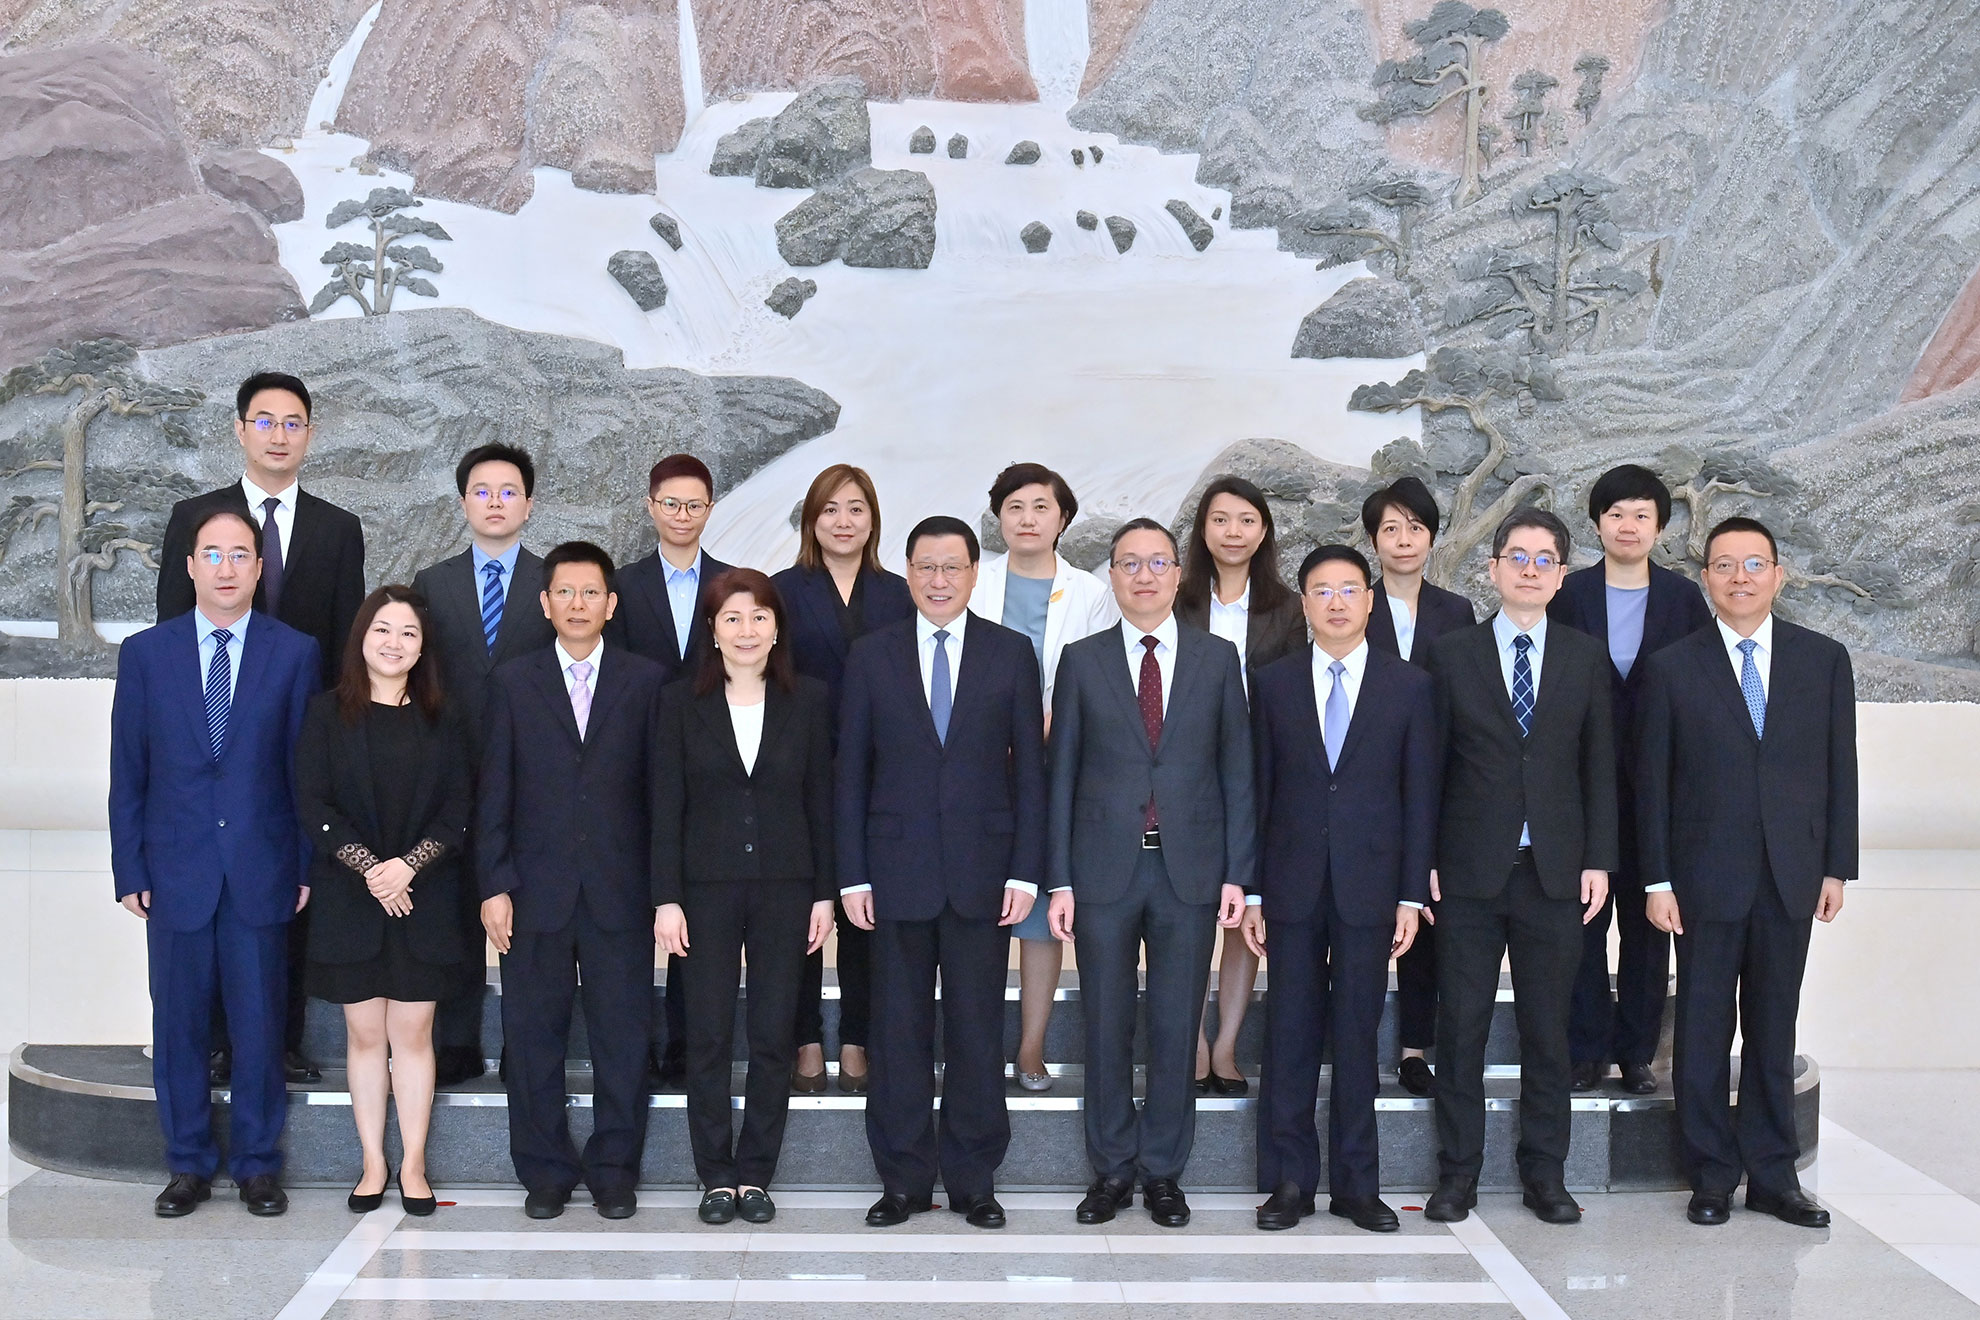 The Secretary for Justice, Mr Paul Lam, SC (front row, fourth right), calls on the Supreme People's Procuratorate and meets with the Procurator-General, Mr Ying Yong (front row, fifth left), this morning (May 30) in Beijing. Photo shows both sides before the meeting.